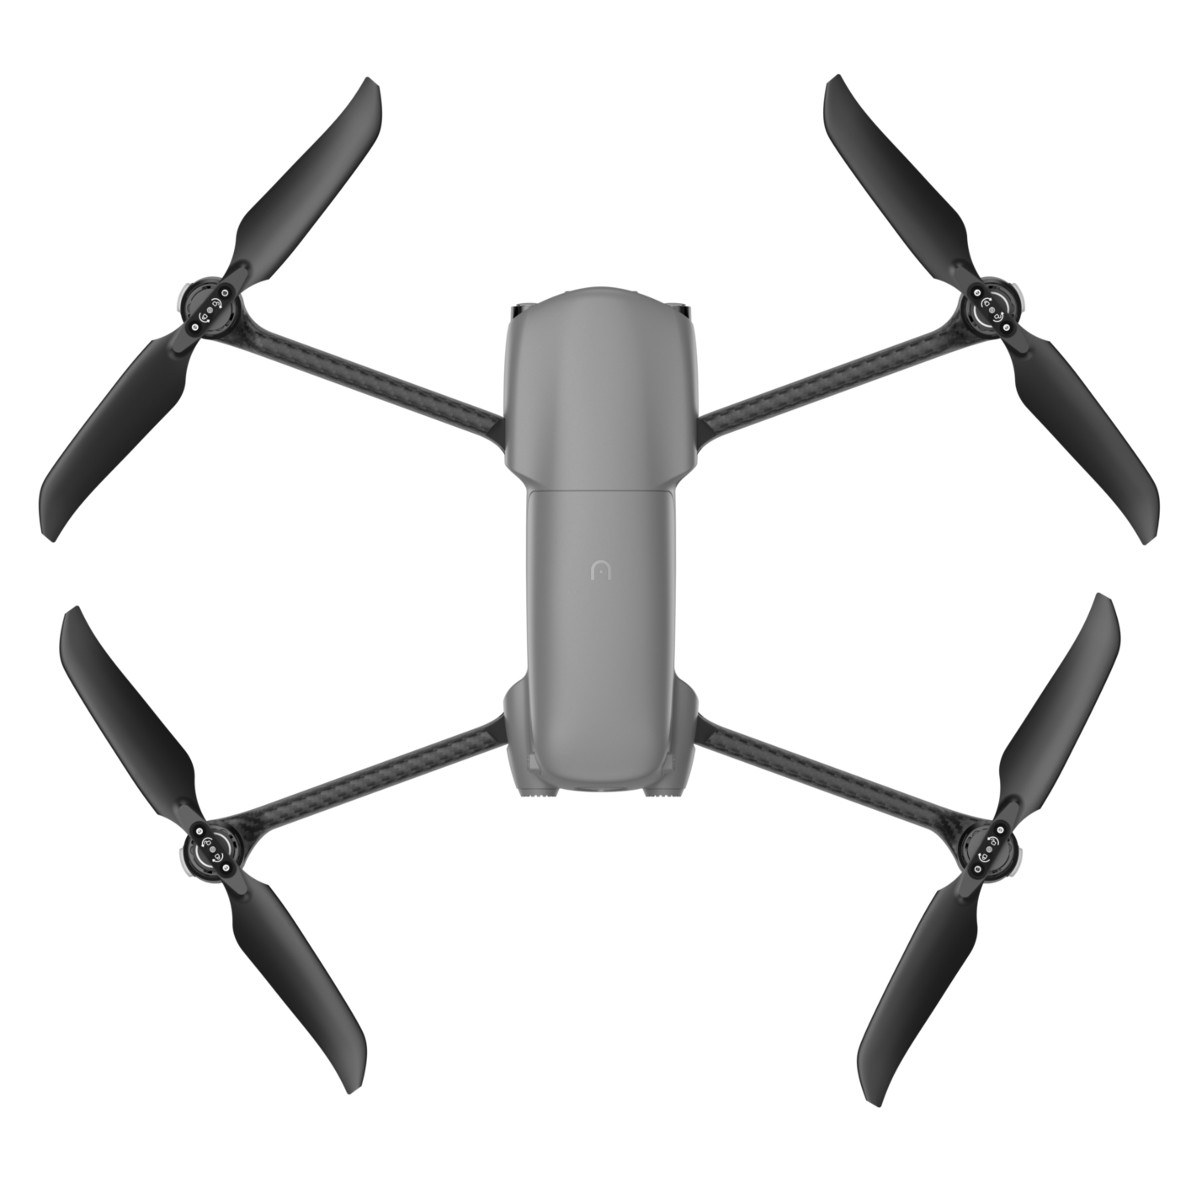 Find Autel Robotics EVO Lite Lite Plus 12KM FPV with 1 CMOS F2 8 F11 6K 30FPS Video 3 Axis Gimbal 40mins Flight Time Obstacle Avoidance RC Drone Quadcopter RTF for Sale on Gipsybee.com with cryptocurrencies